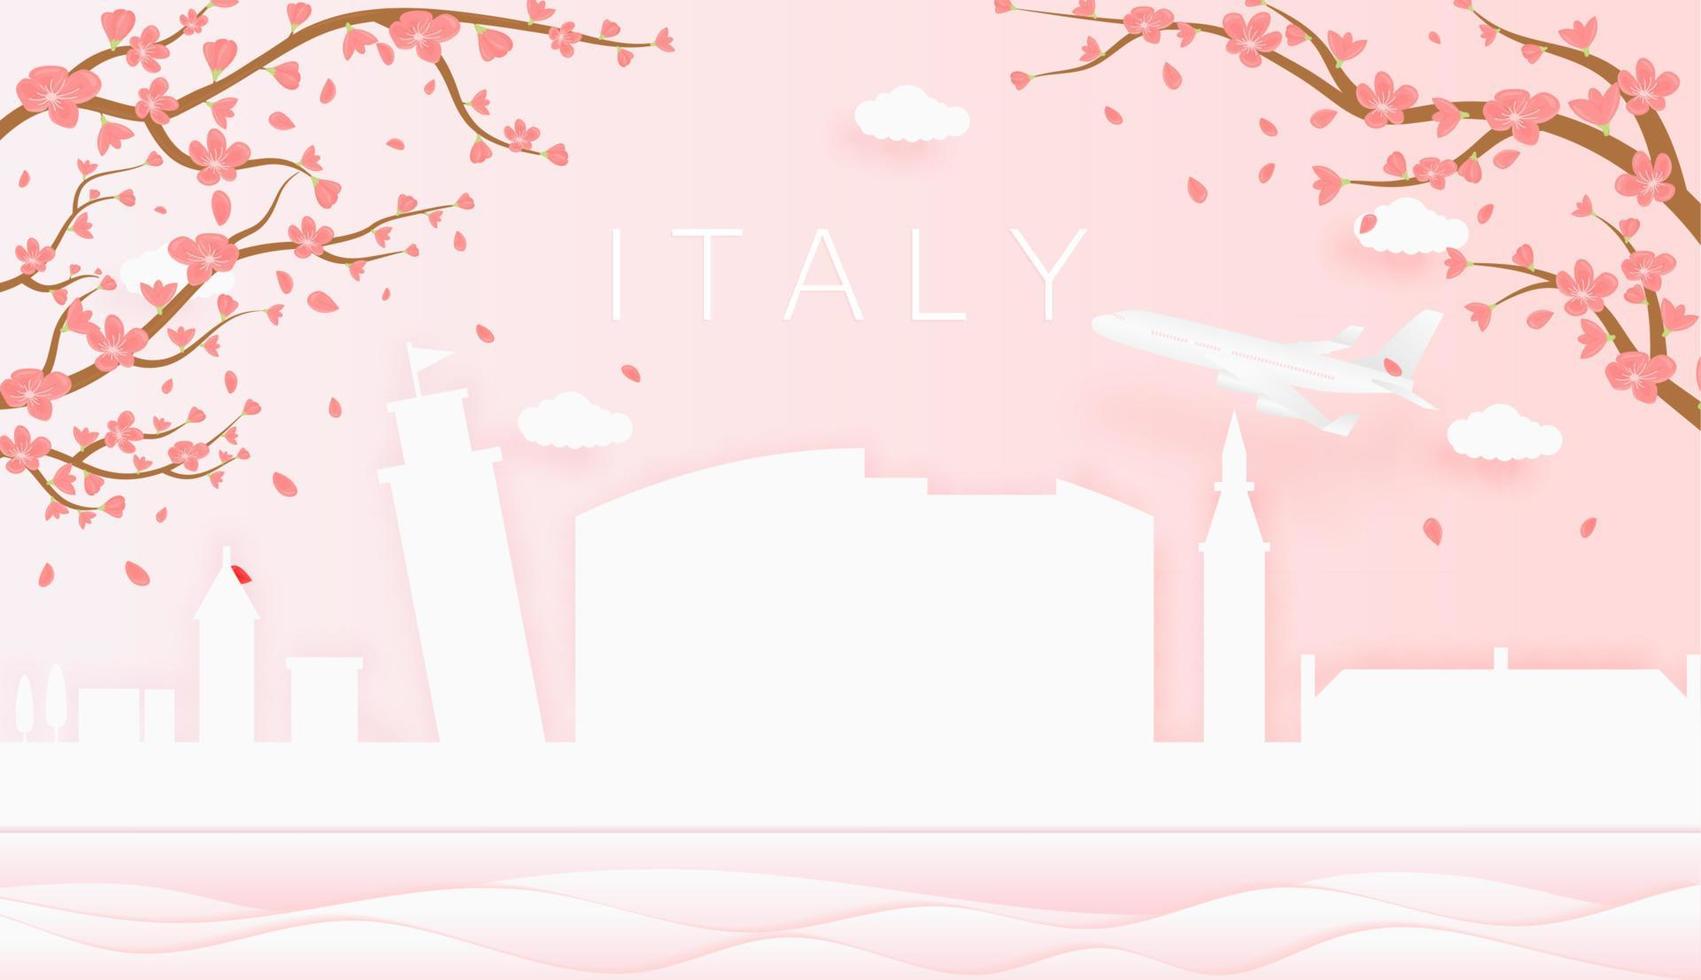 Panorama travel postcard, poster, tour advertising of world famous landmarks of Italy, spring season with blooming flowers in tree vector icon